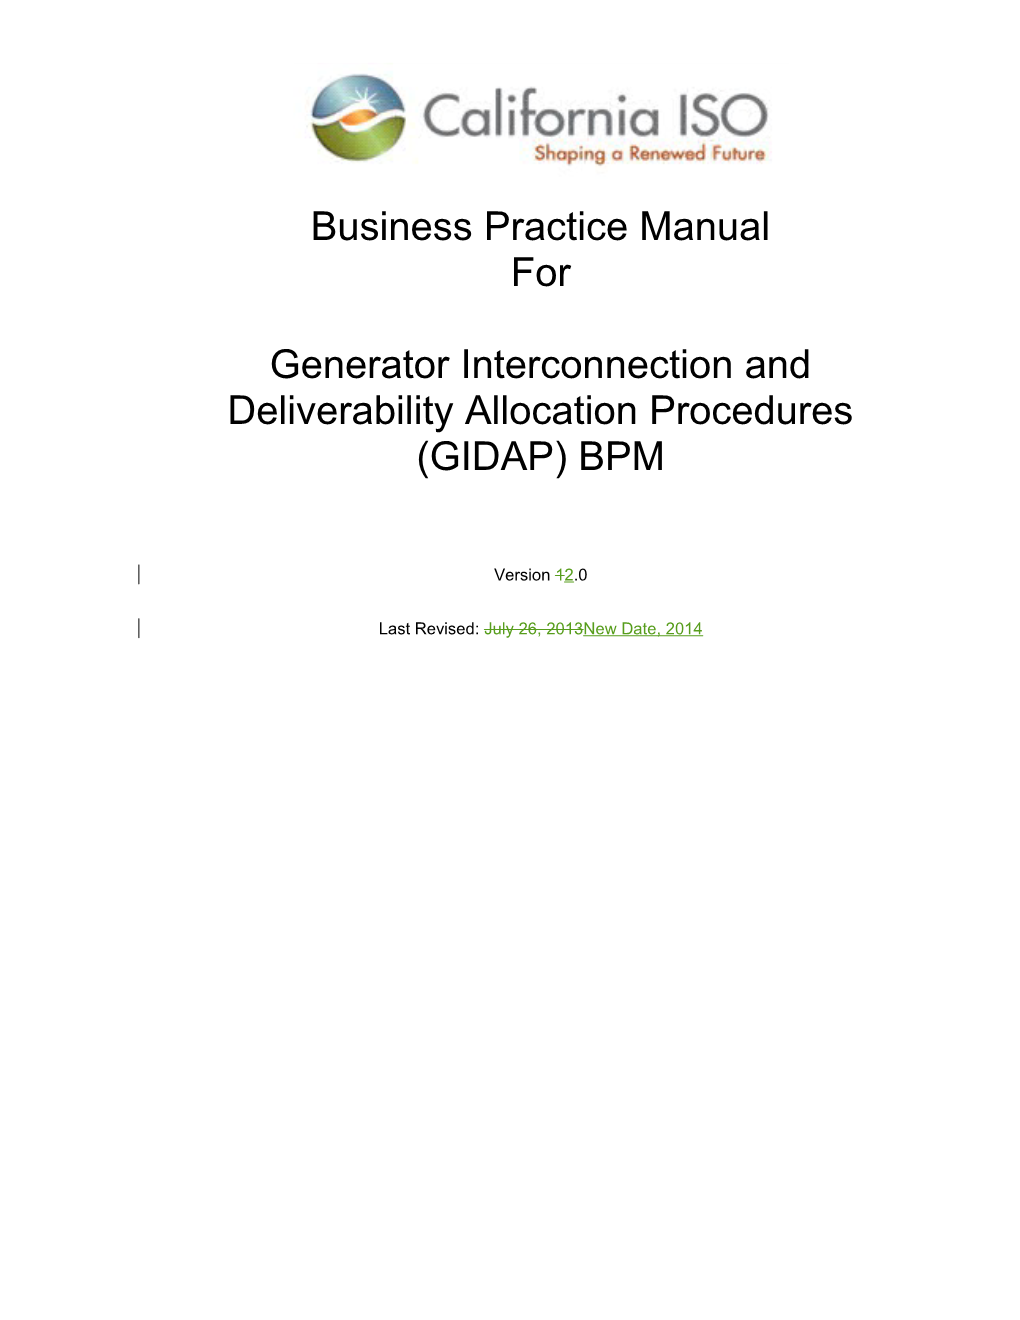 CAISO Business Practice Manual BPM for the Generator Interconnection and Deliverability s1